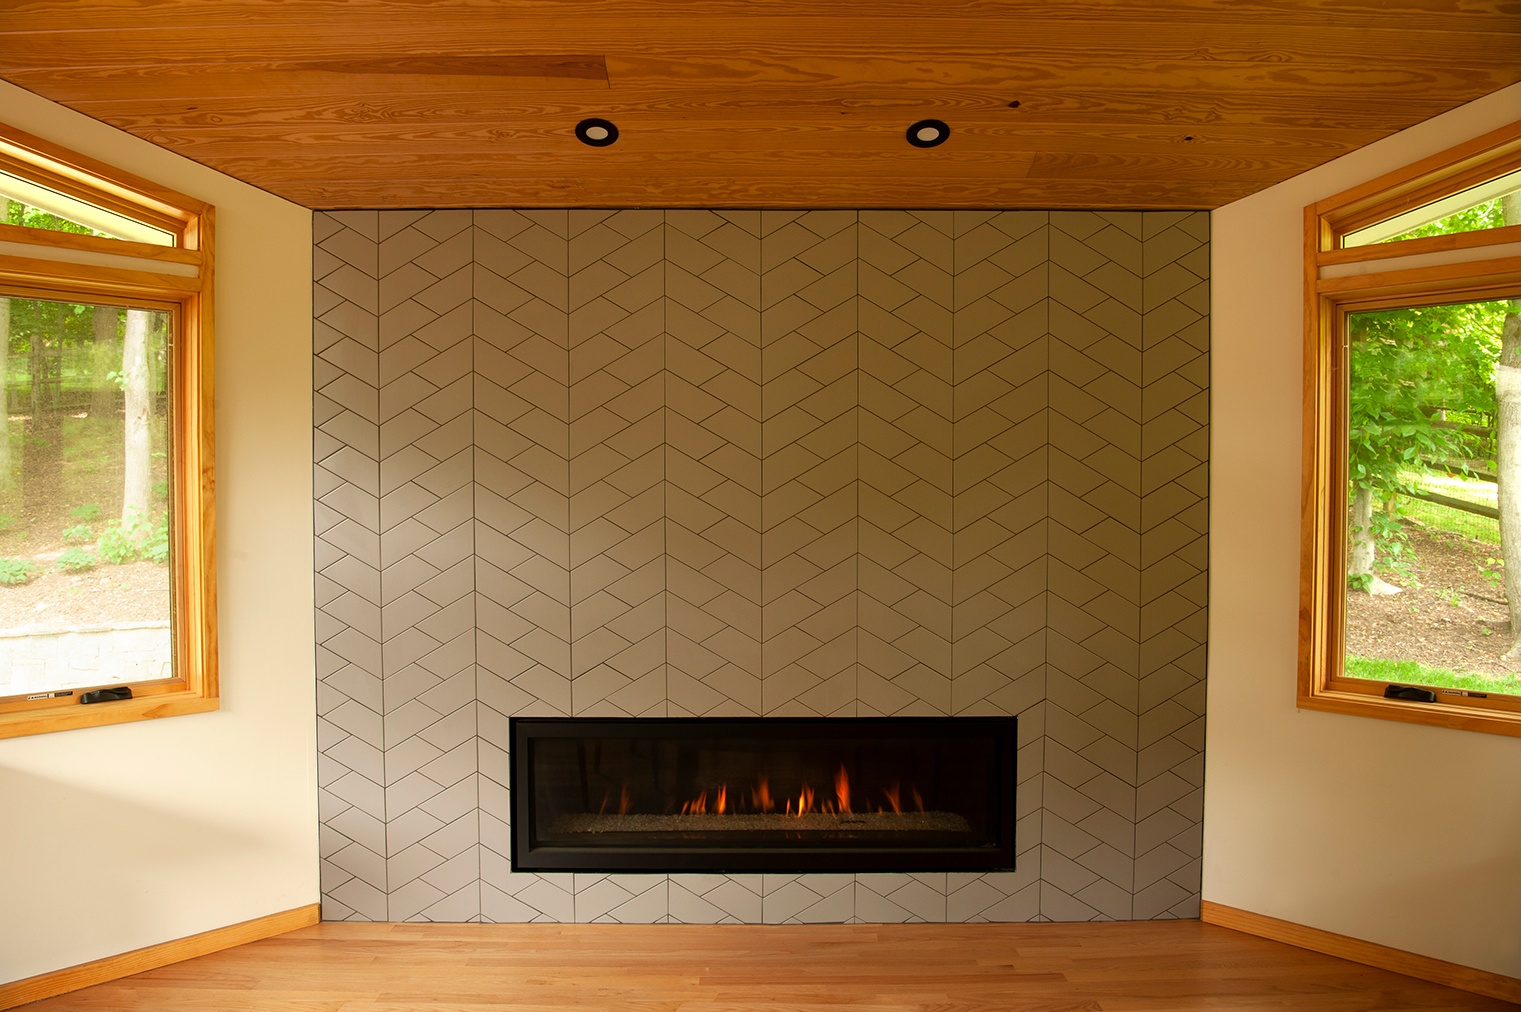 Gas fireplace set into wall of porcelain geometric tile from Ann Sacks Tile.